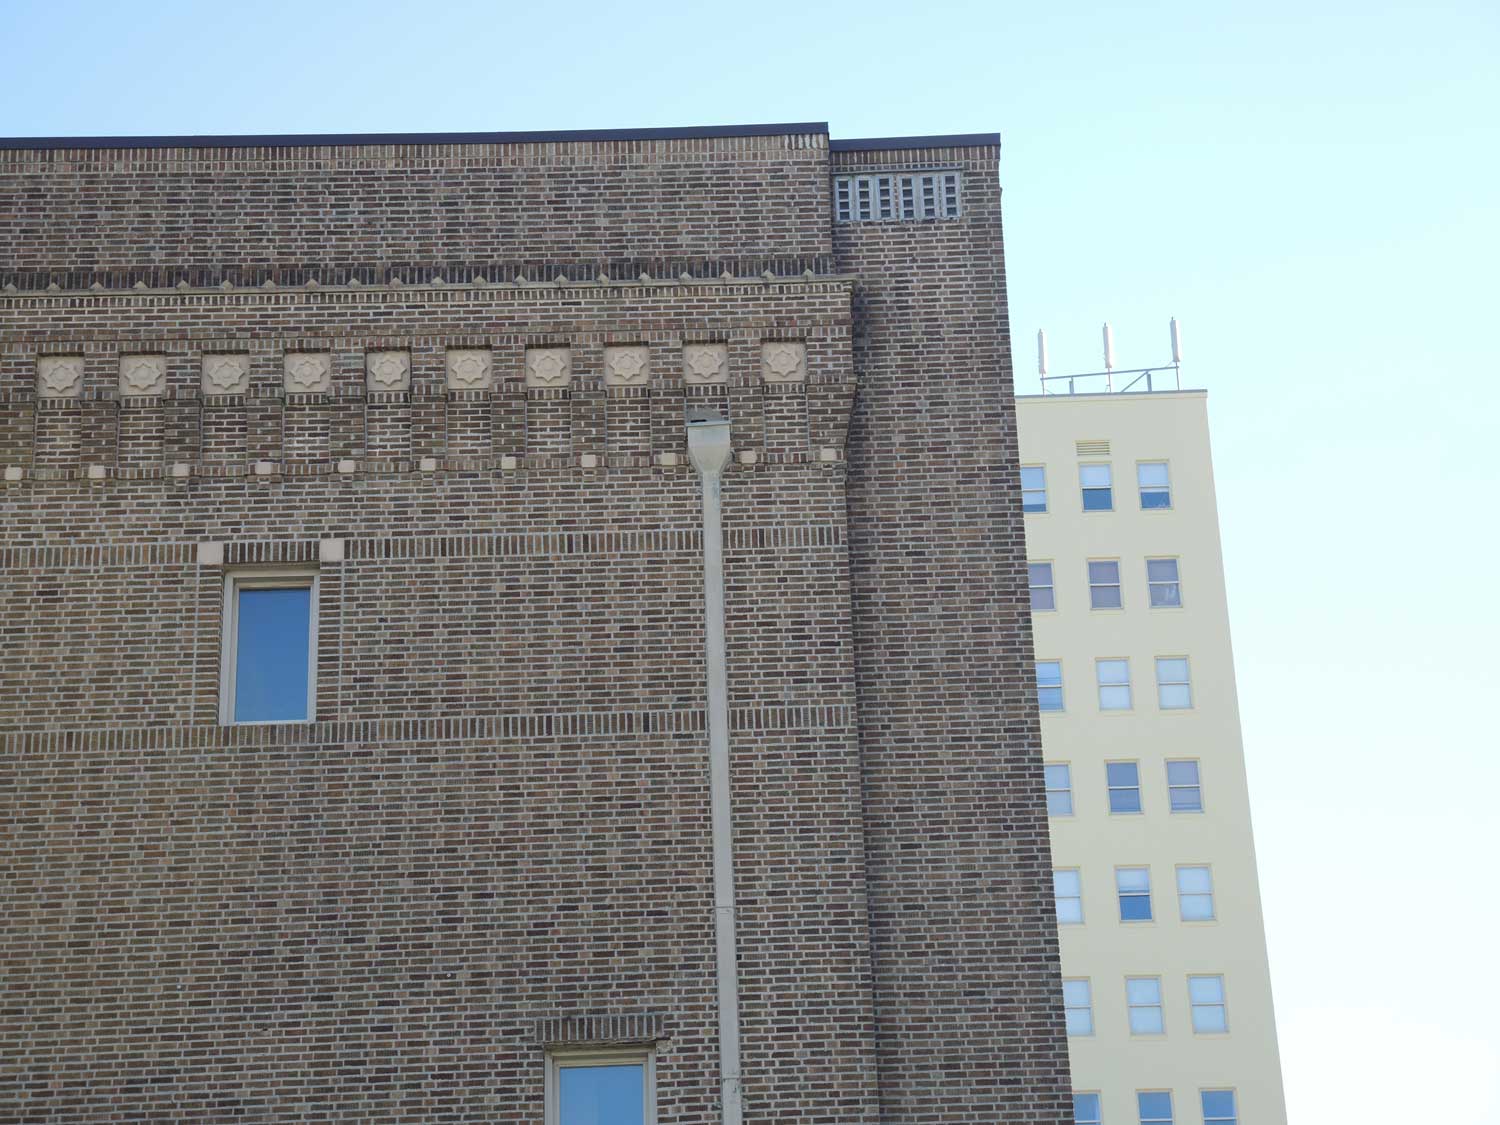 View of the top north corner of the facade on Calliope